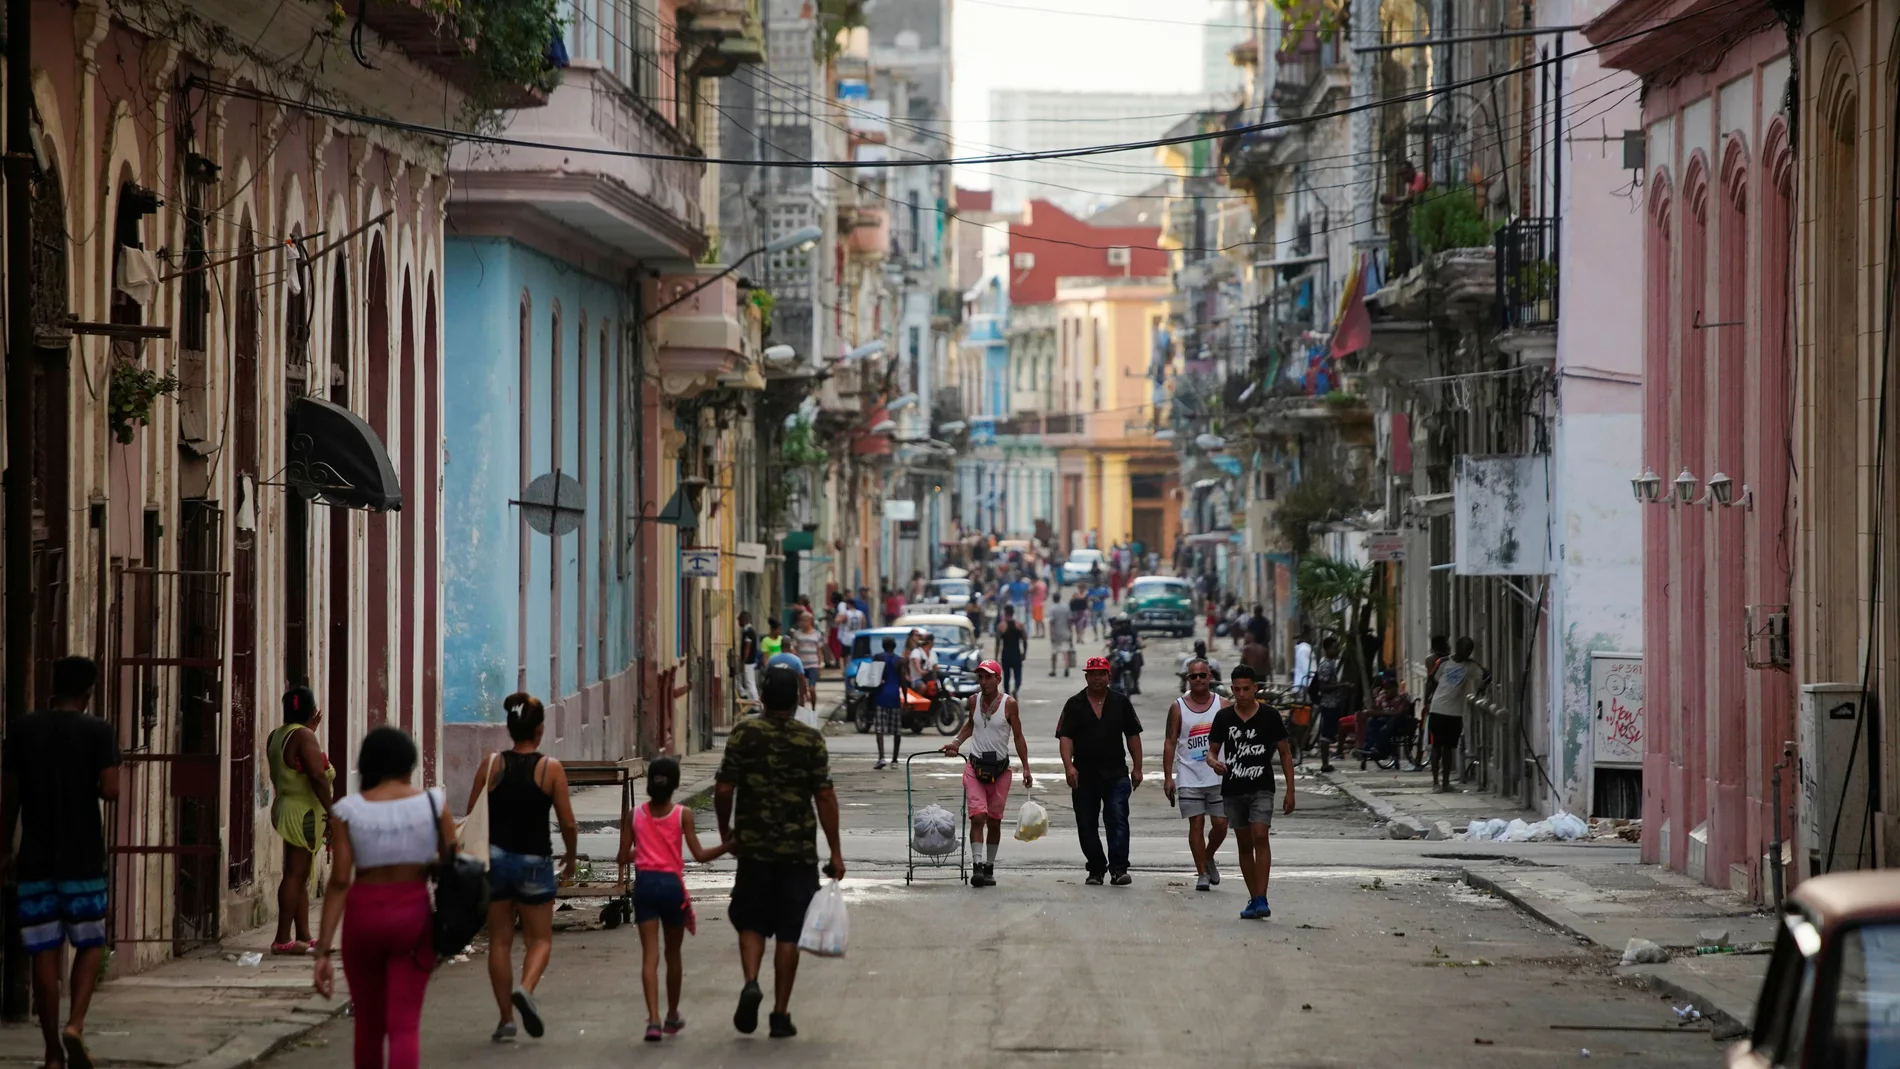 A view of a street in downtown Havana